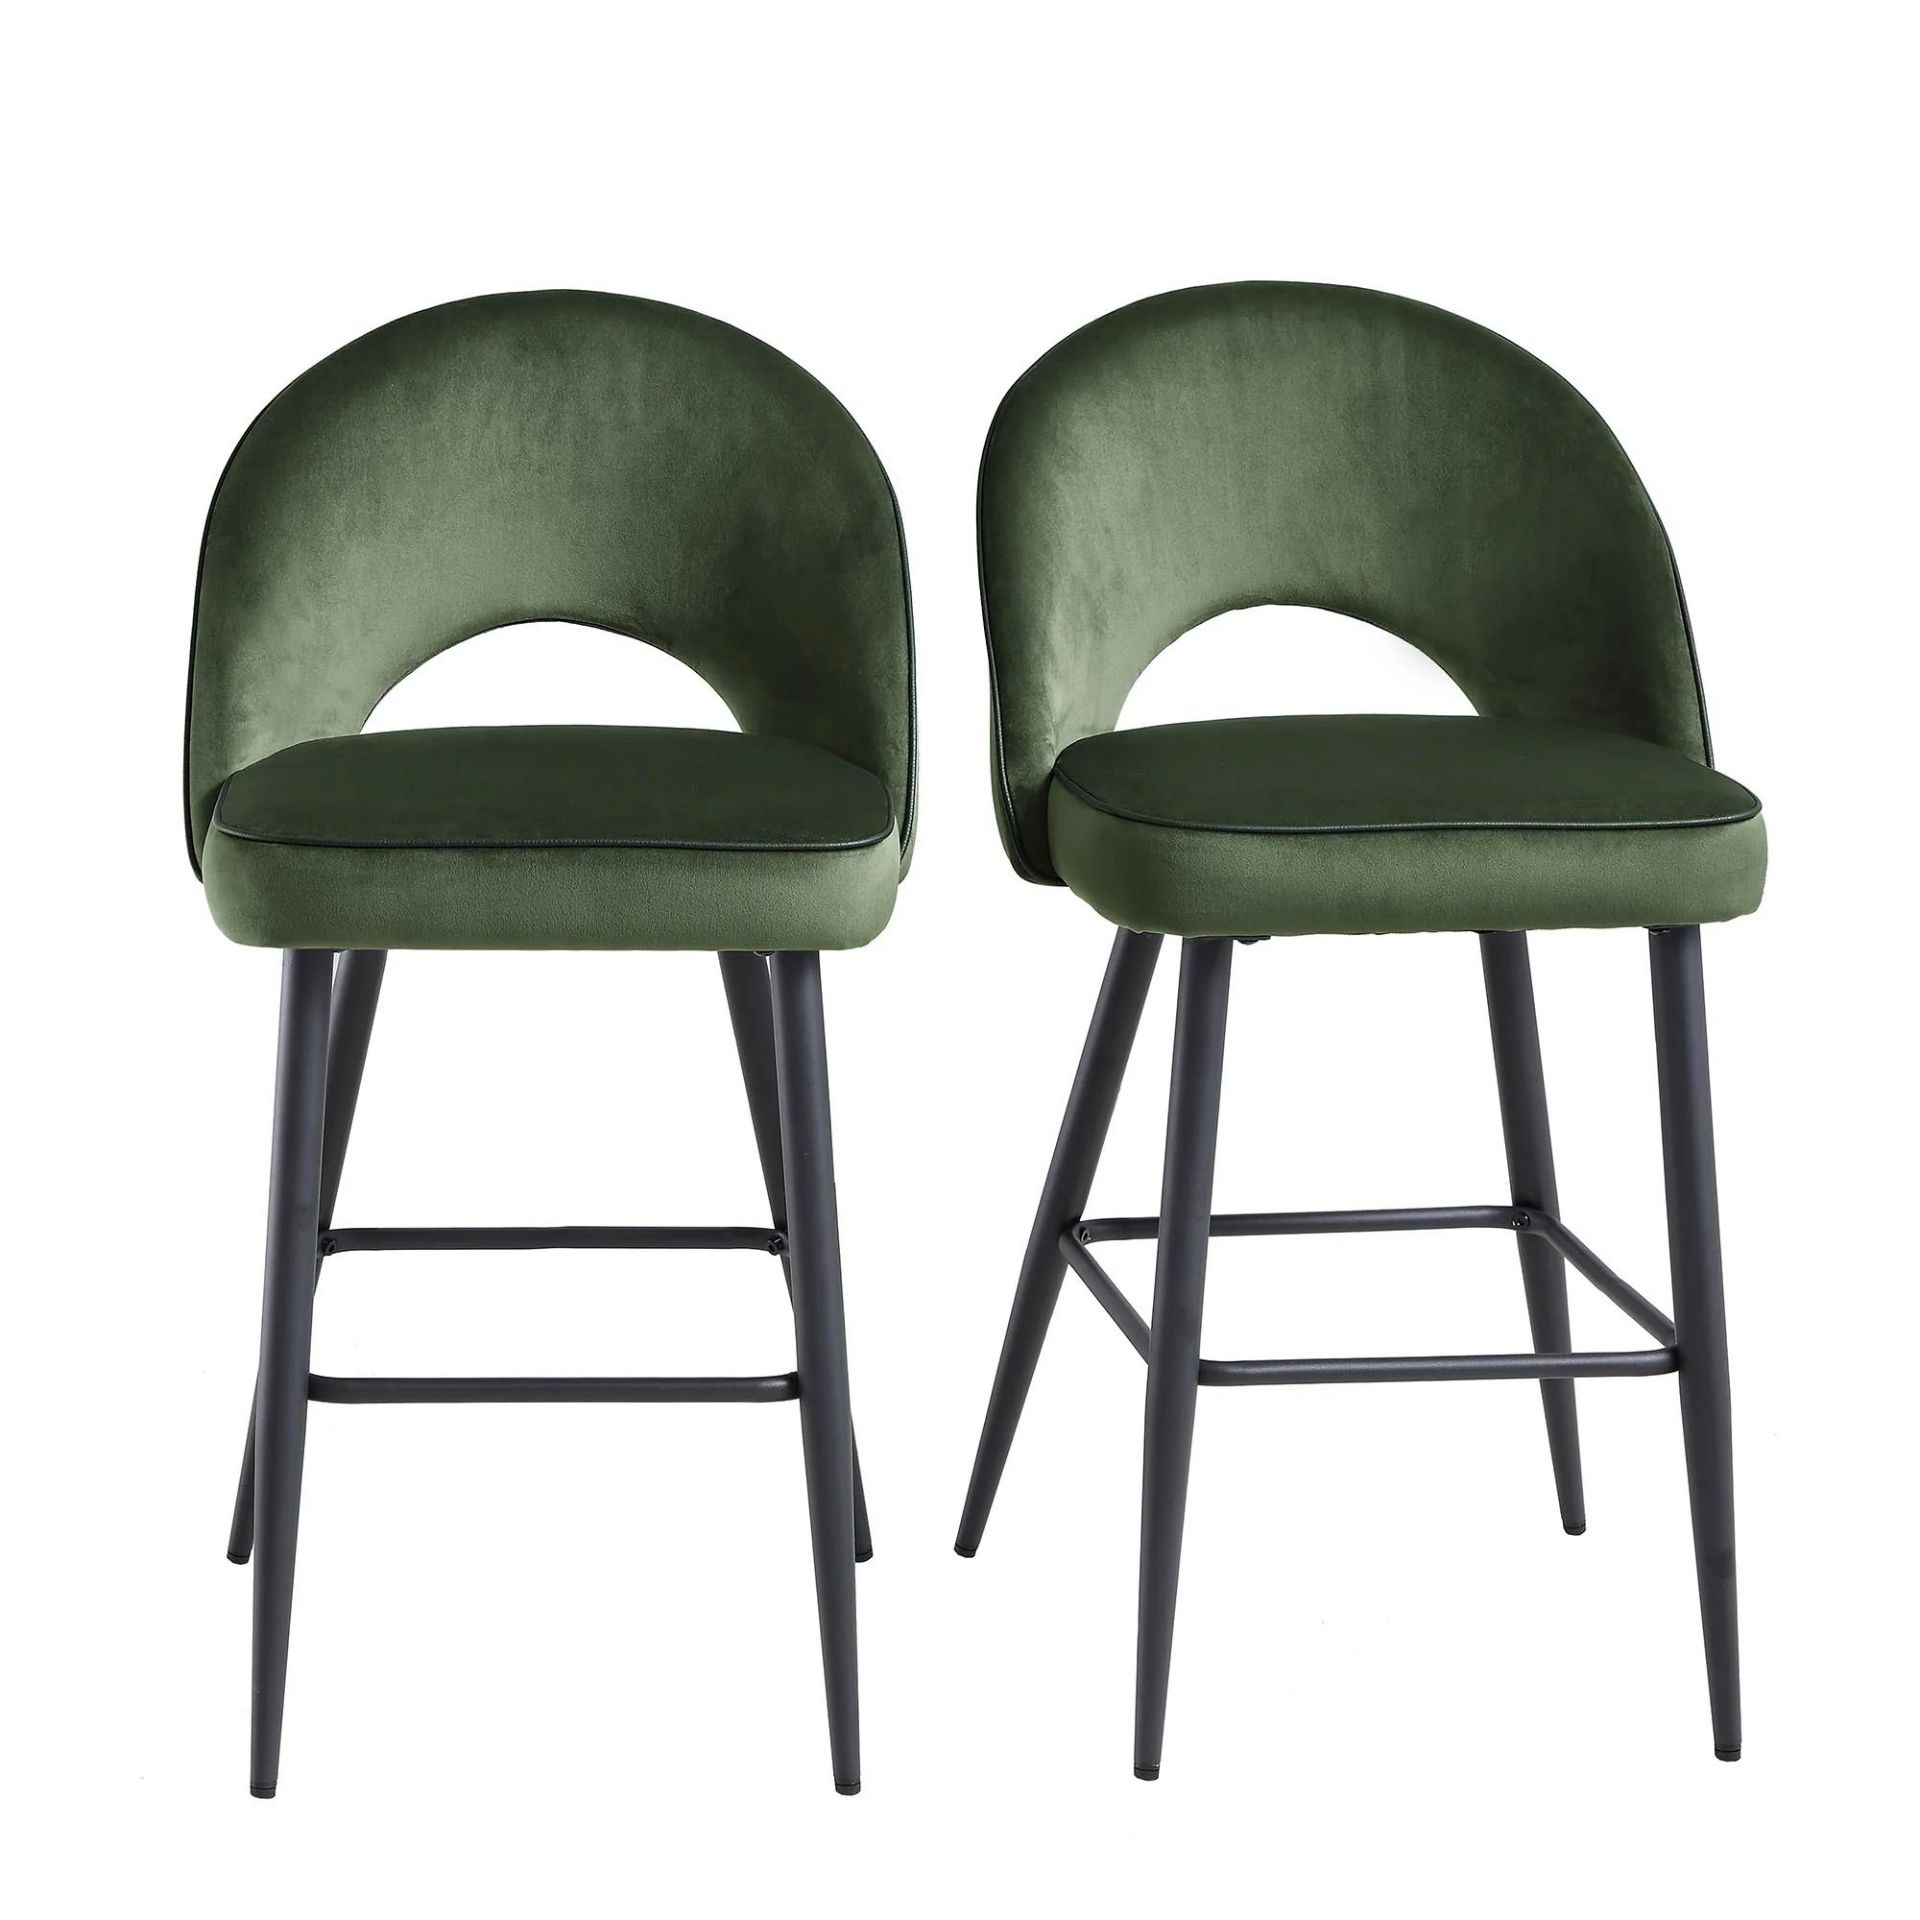 Oakley Set of 2 Dark Green Velvet Upholstered Counter Stools with Contrast Piping. - ER29. RRP £ - Image 2 of 4